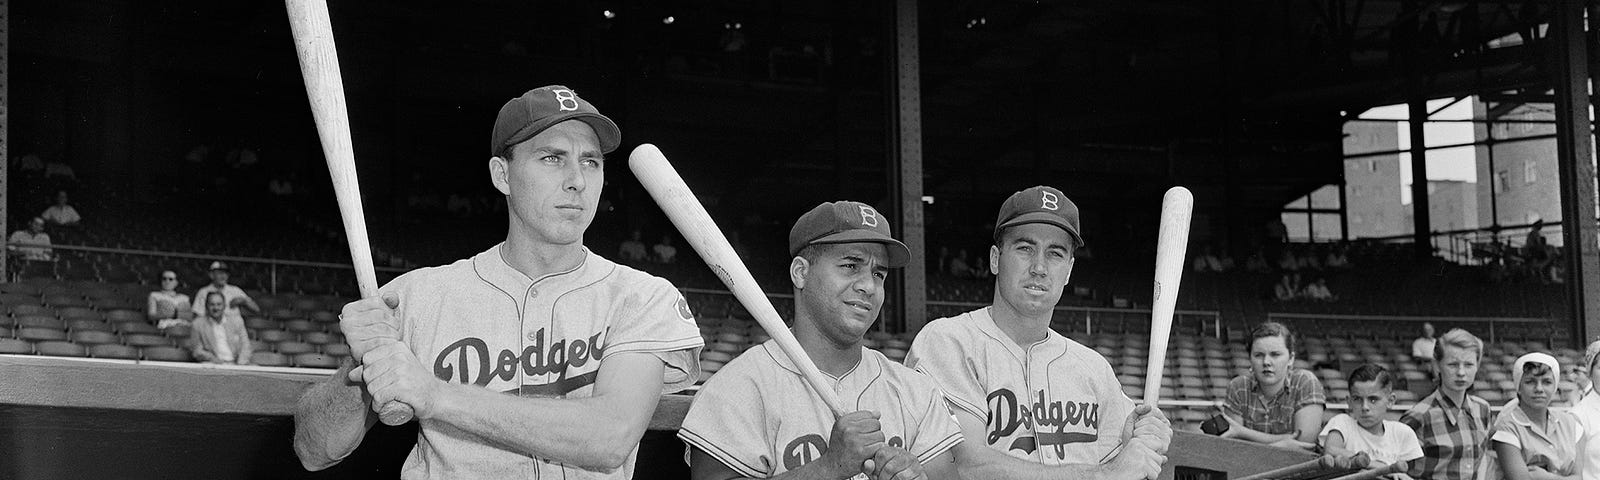 Gil Hodges, Maury Wills, Dick Allen on Hall of Fame committee ballot, by  Rowan Kavner